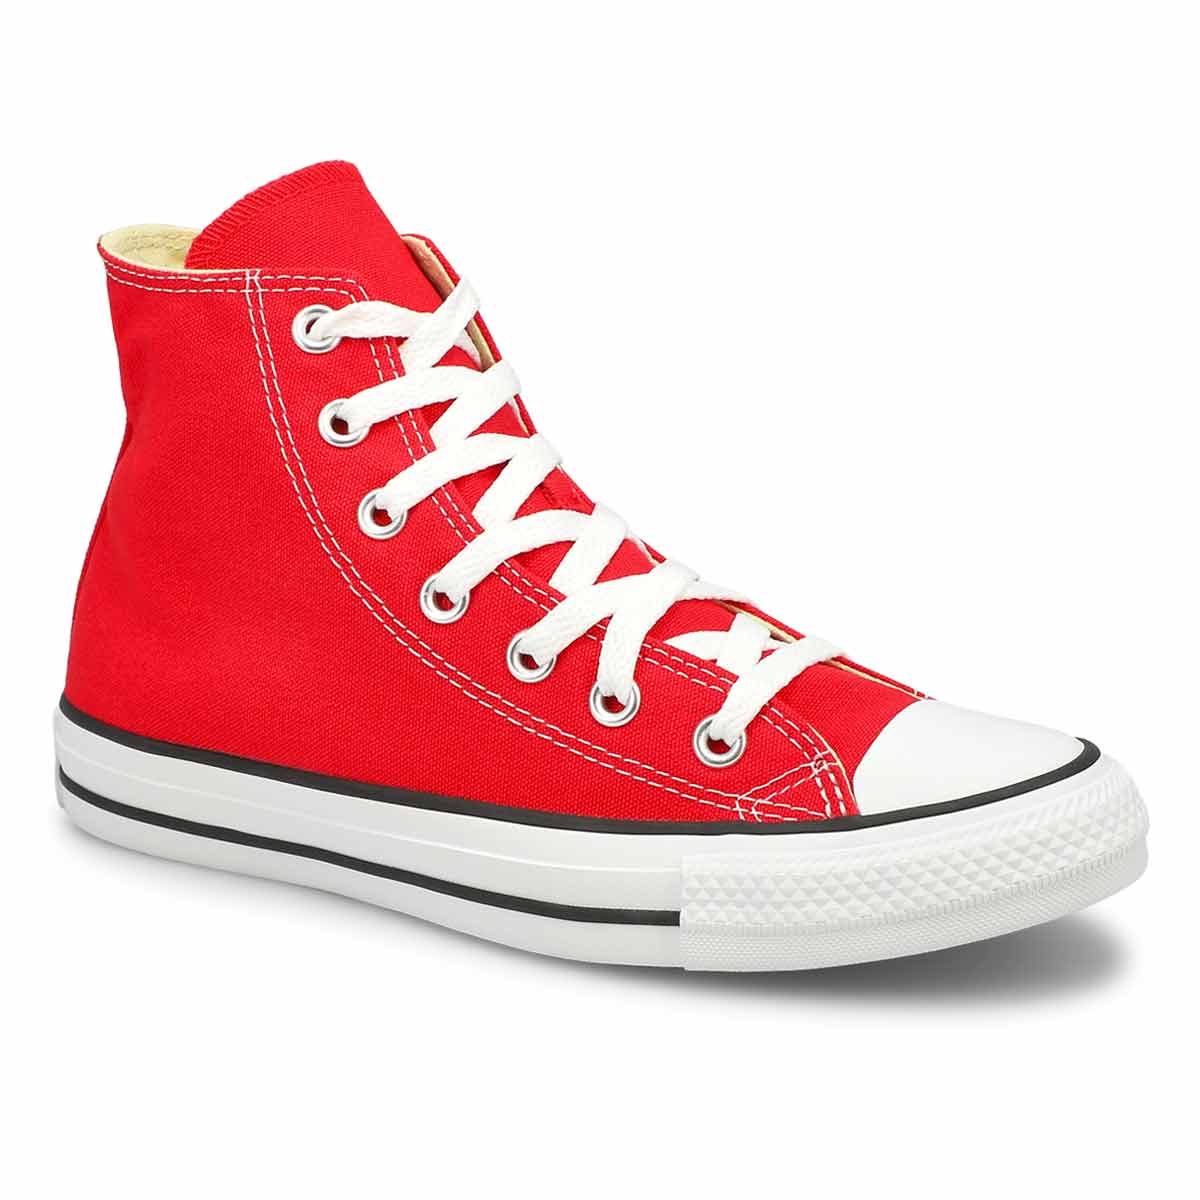 red converse on sale womens